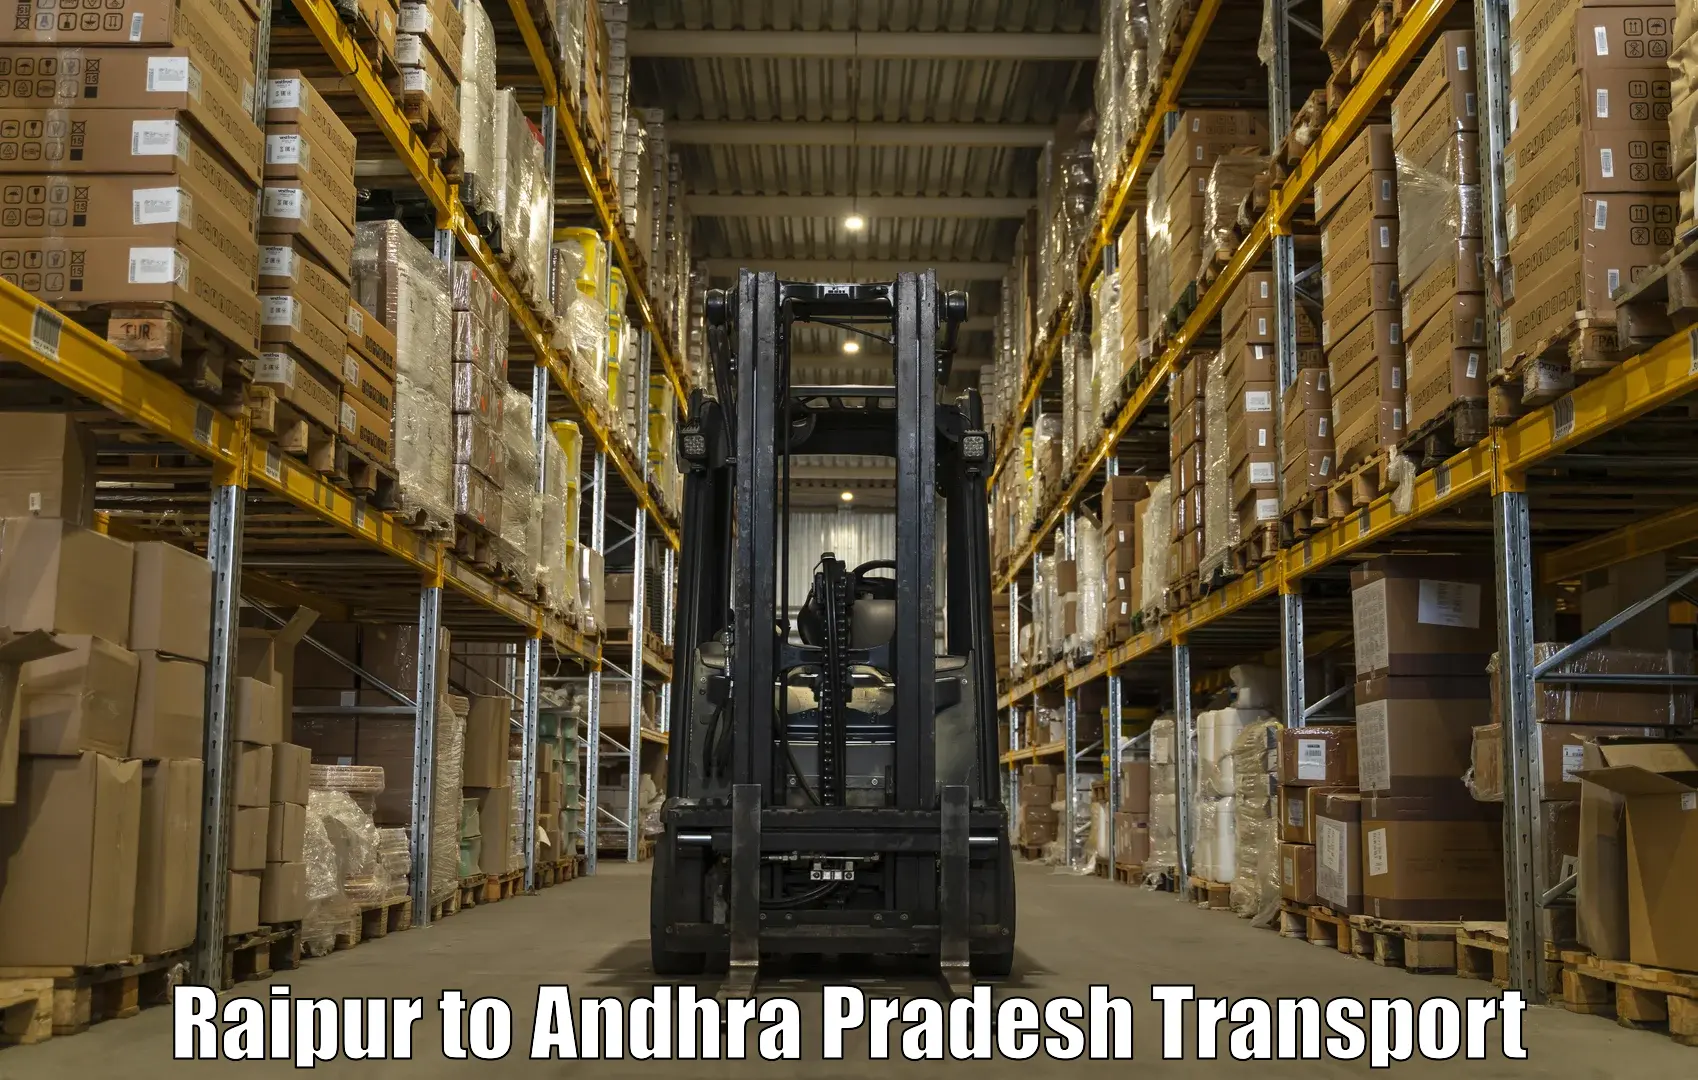 Goods delivery service Raipur to Chilakaluripet